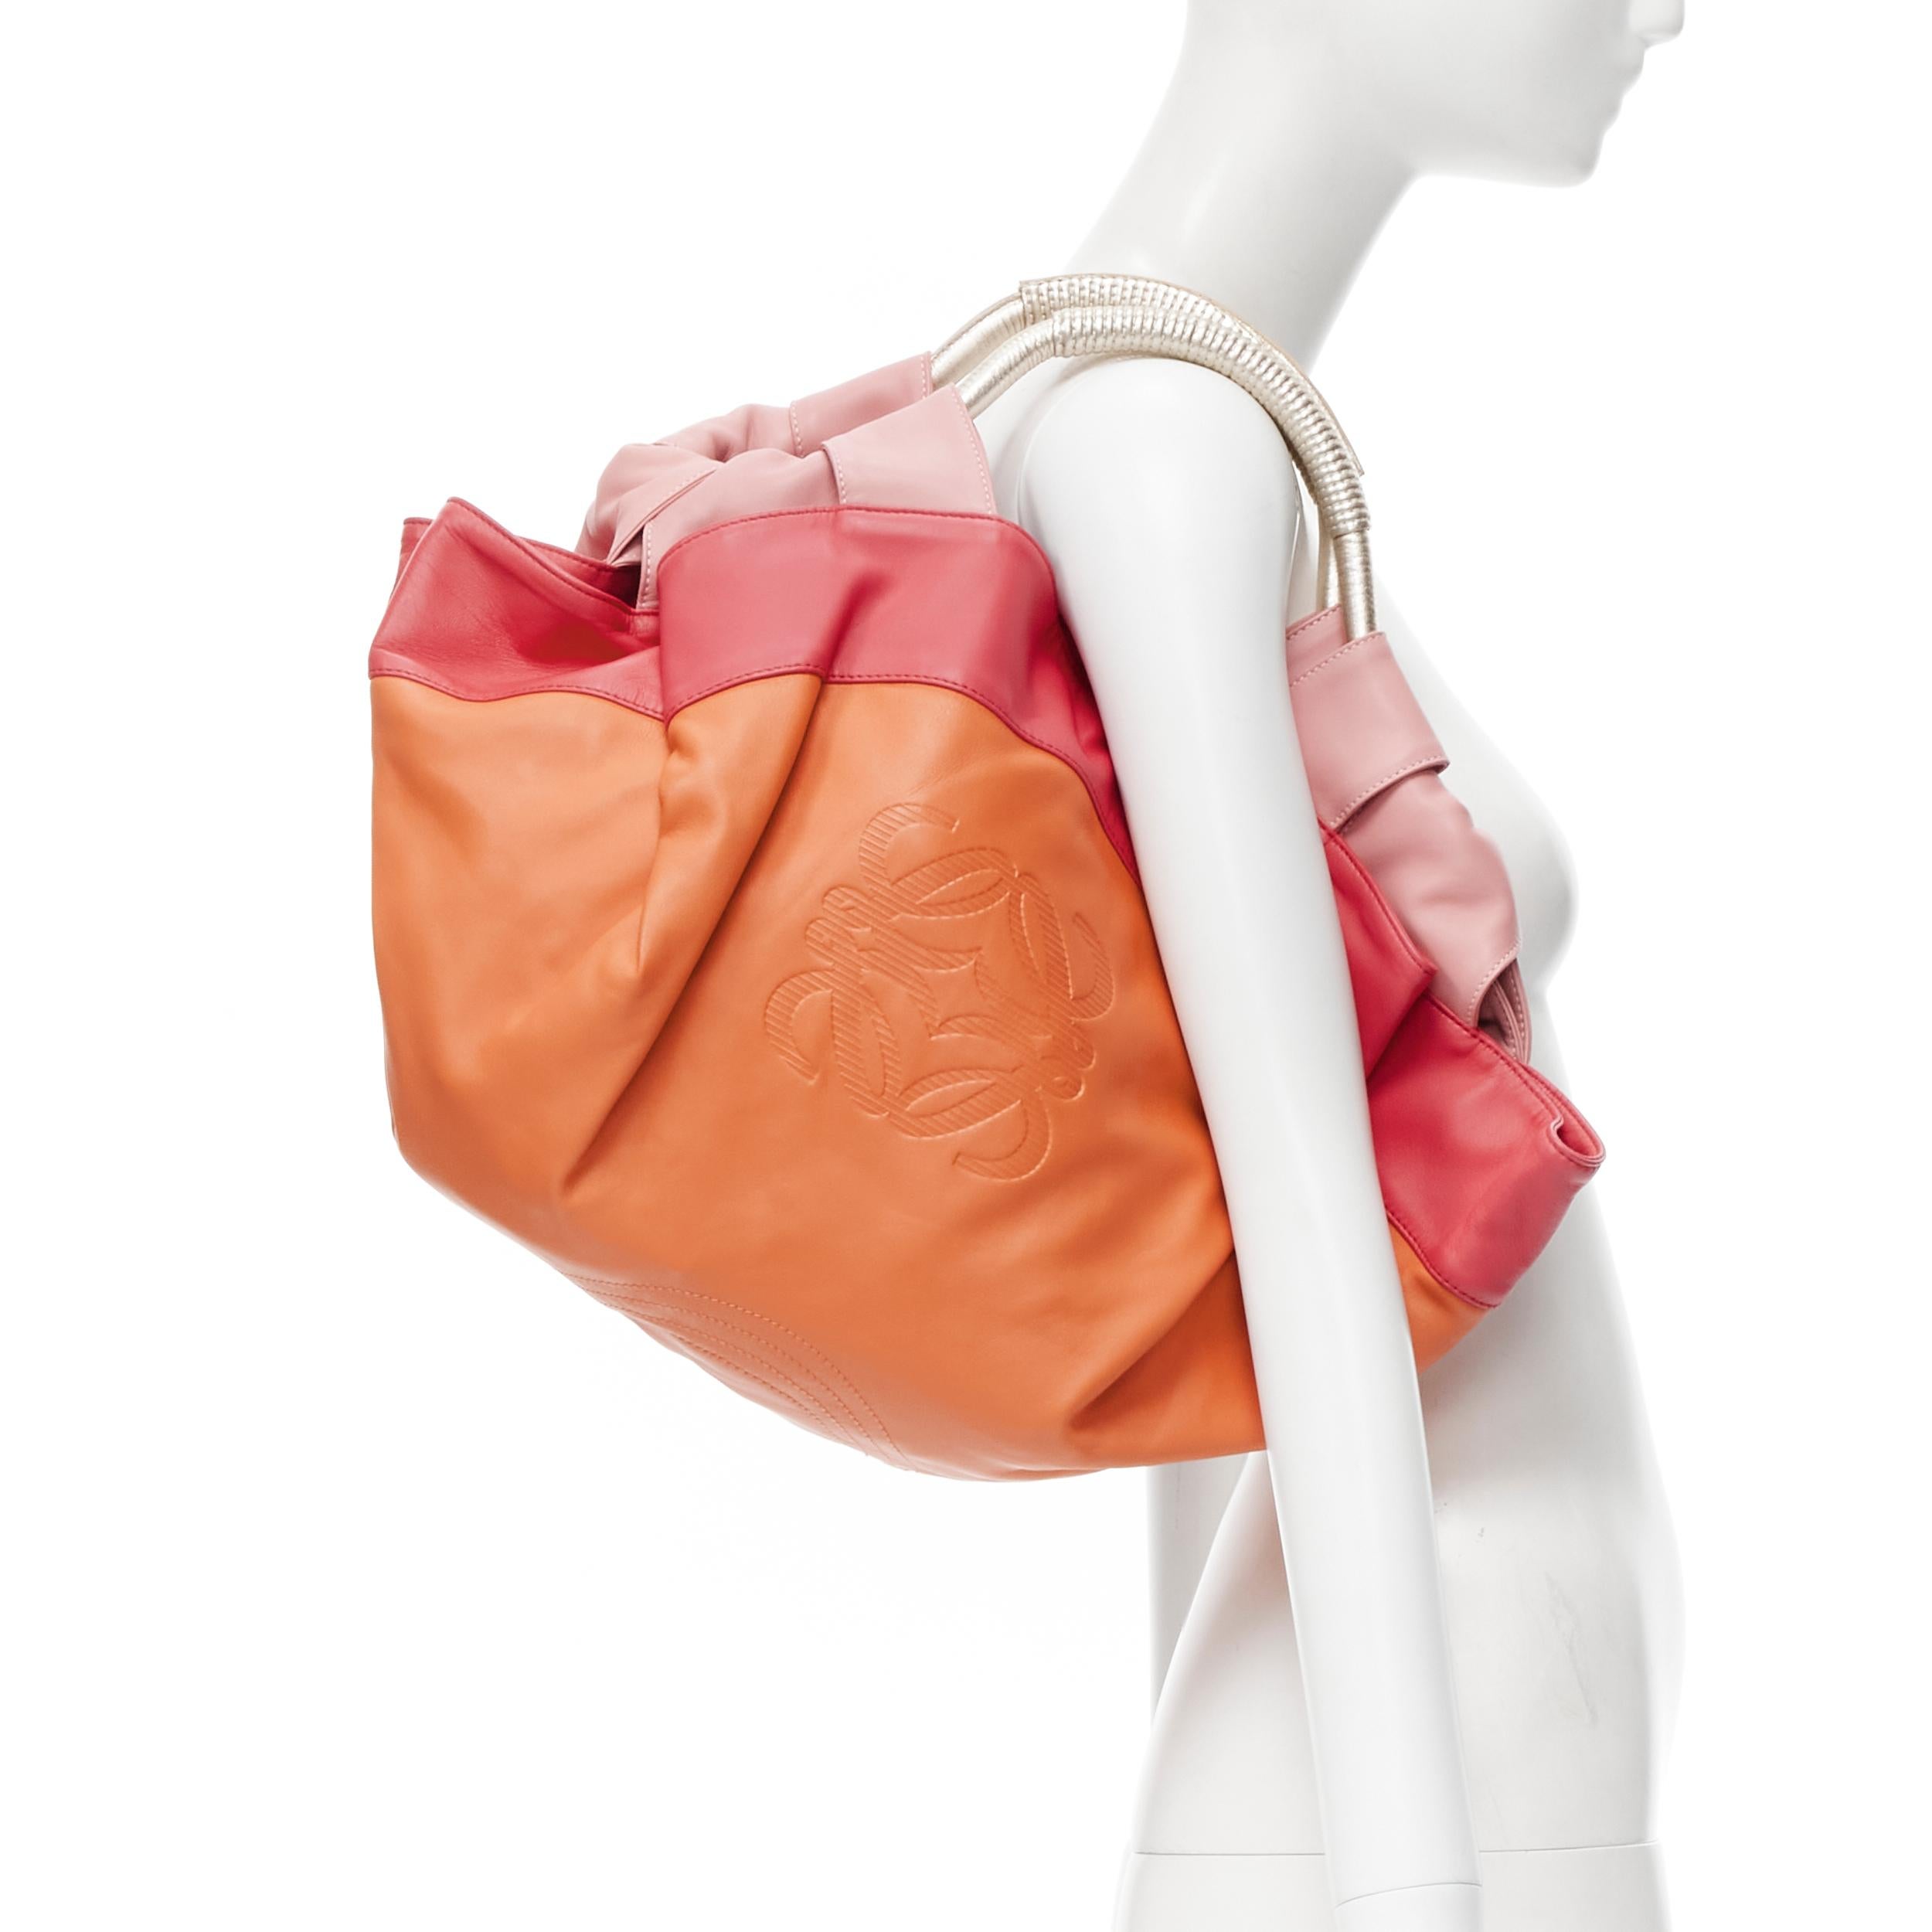 rare LOEWE Nappa Aire Brisa orange red gold handle dumpling bag 
Reference: CELG/A00025 
Brand: Loewe 
Model: Nappa Aire Brisa 
Material: Leather 
Color: Orange 
Pattern: Solid 
Closure: Magnet 
Made in: Spain 

CONDITION: 
Condition: Excellent,